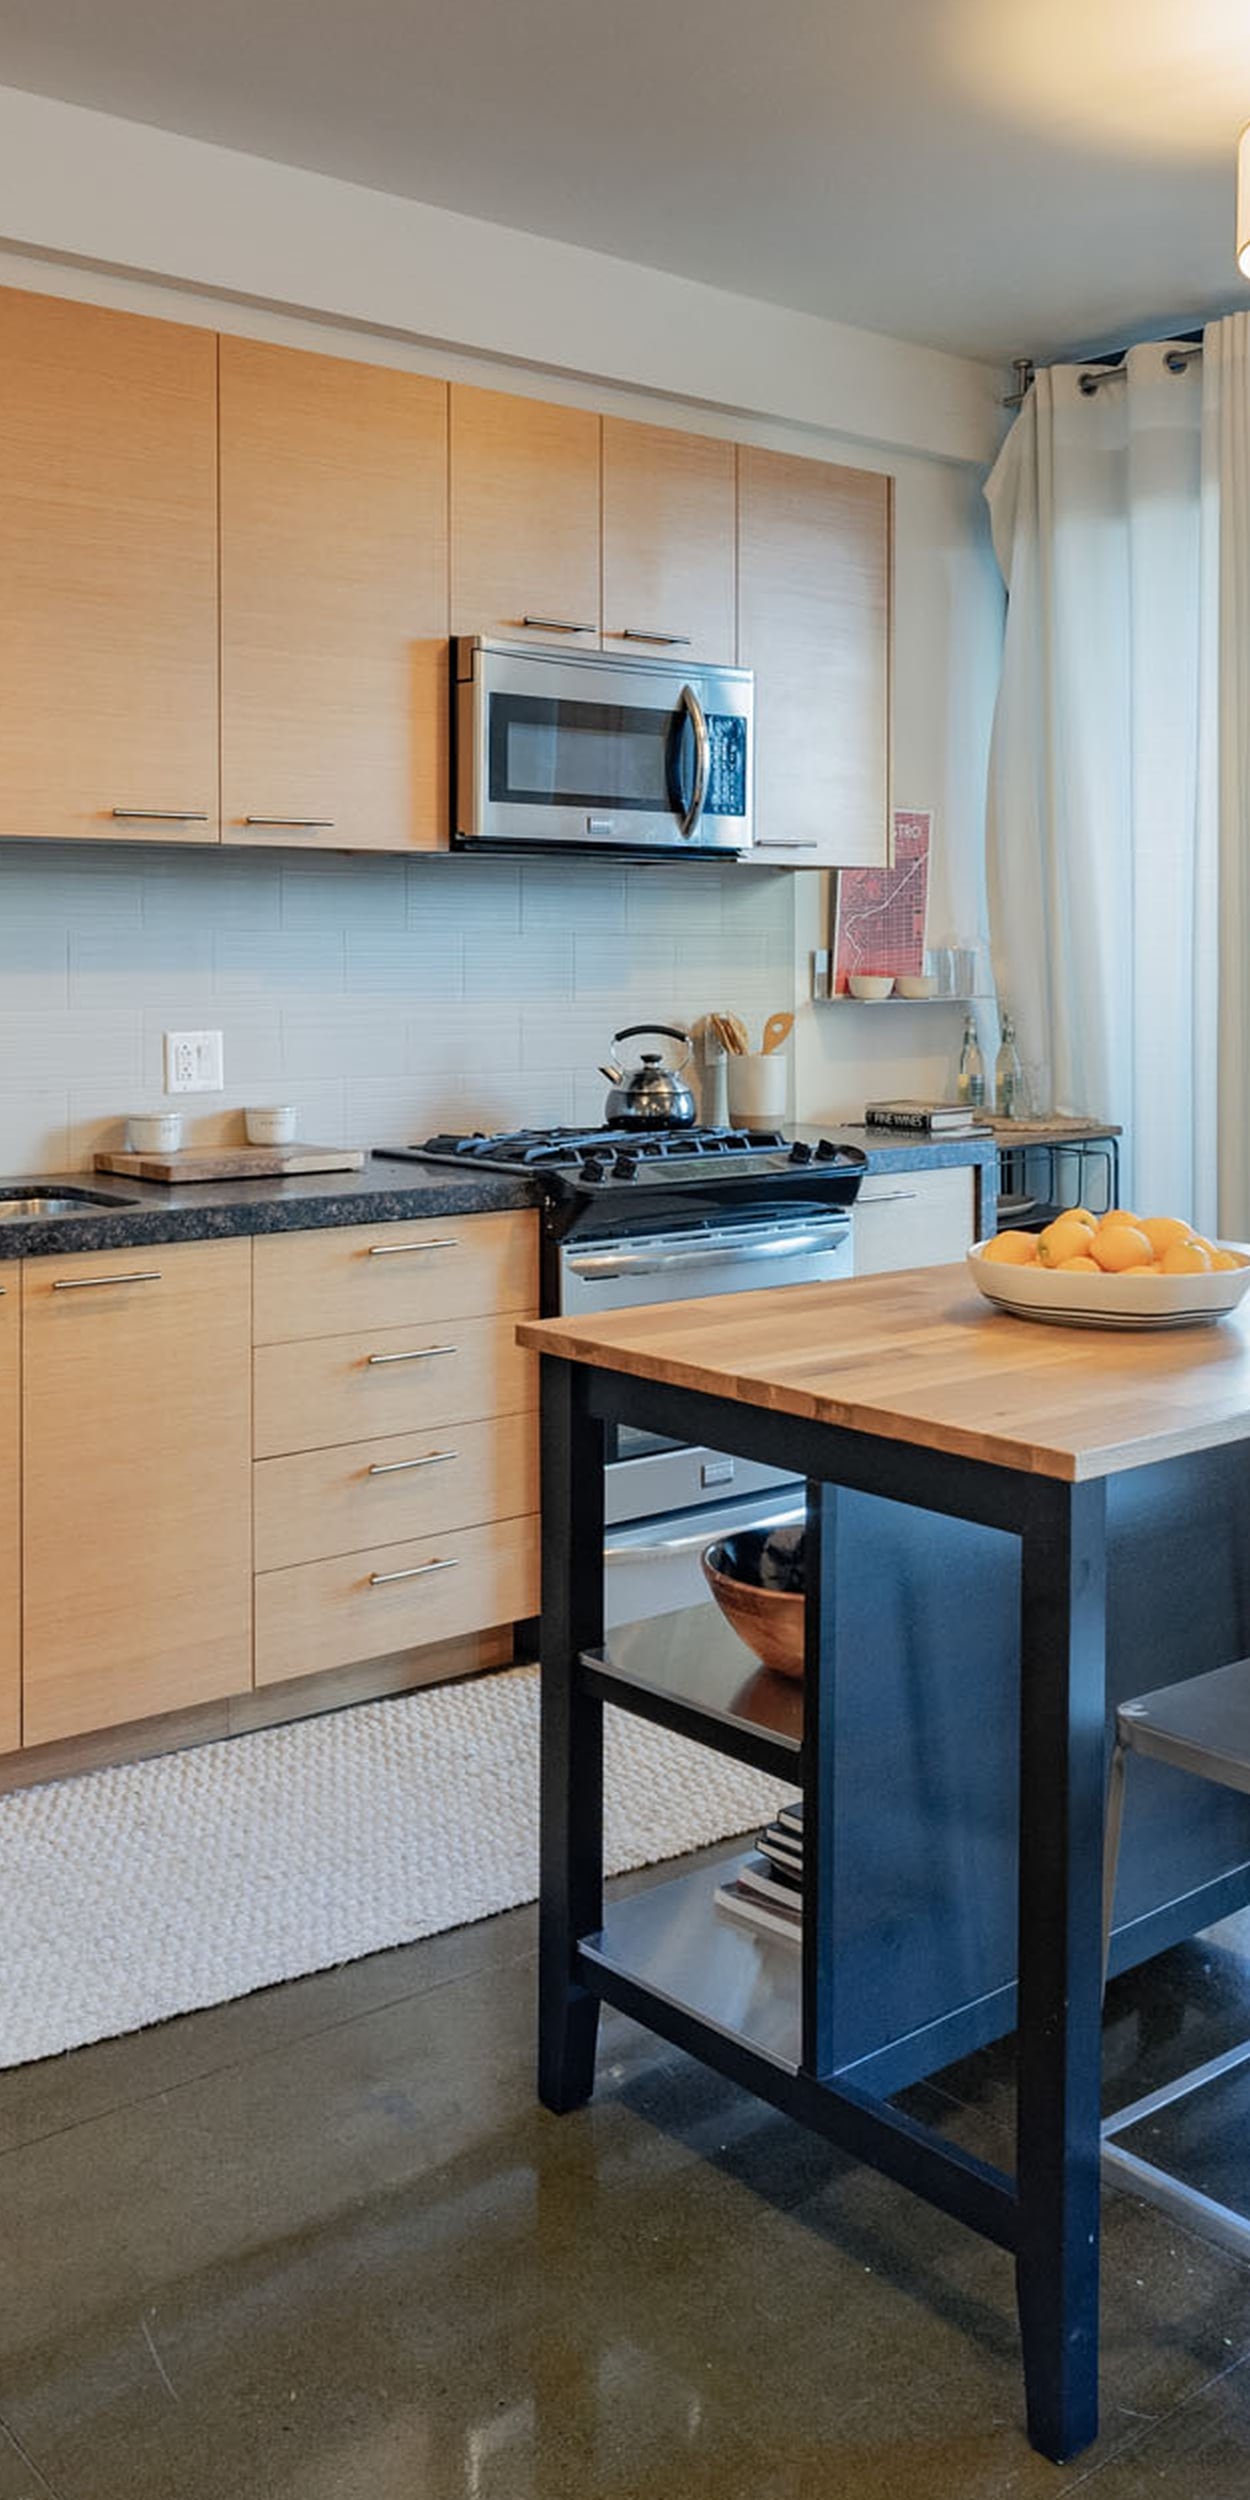 Dogpatch CA Apartments- Sleek Modern Kitchen With Concrete Floors, Granite Countertops, Stylish Wood Cabinets, and Stainless Steel Appliances